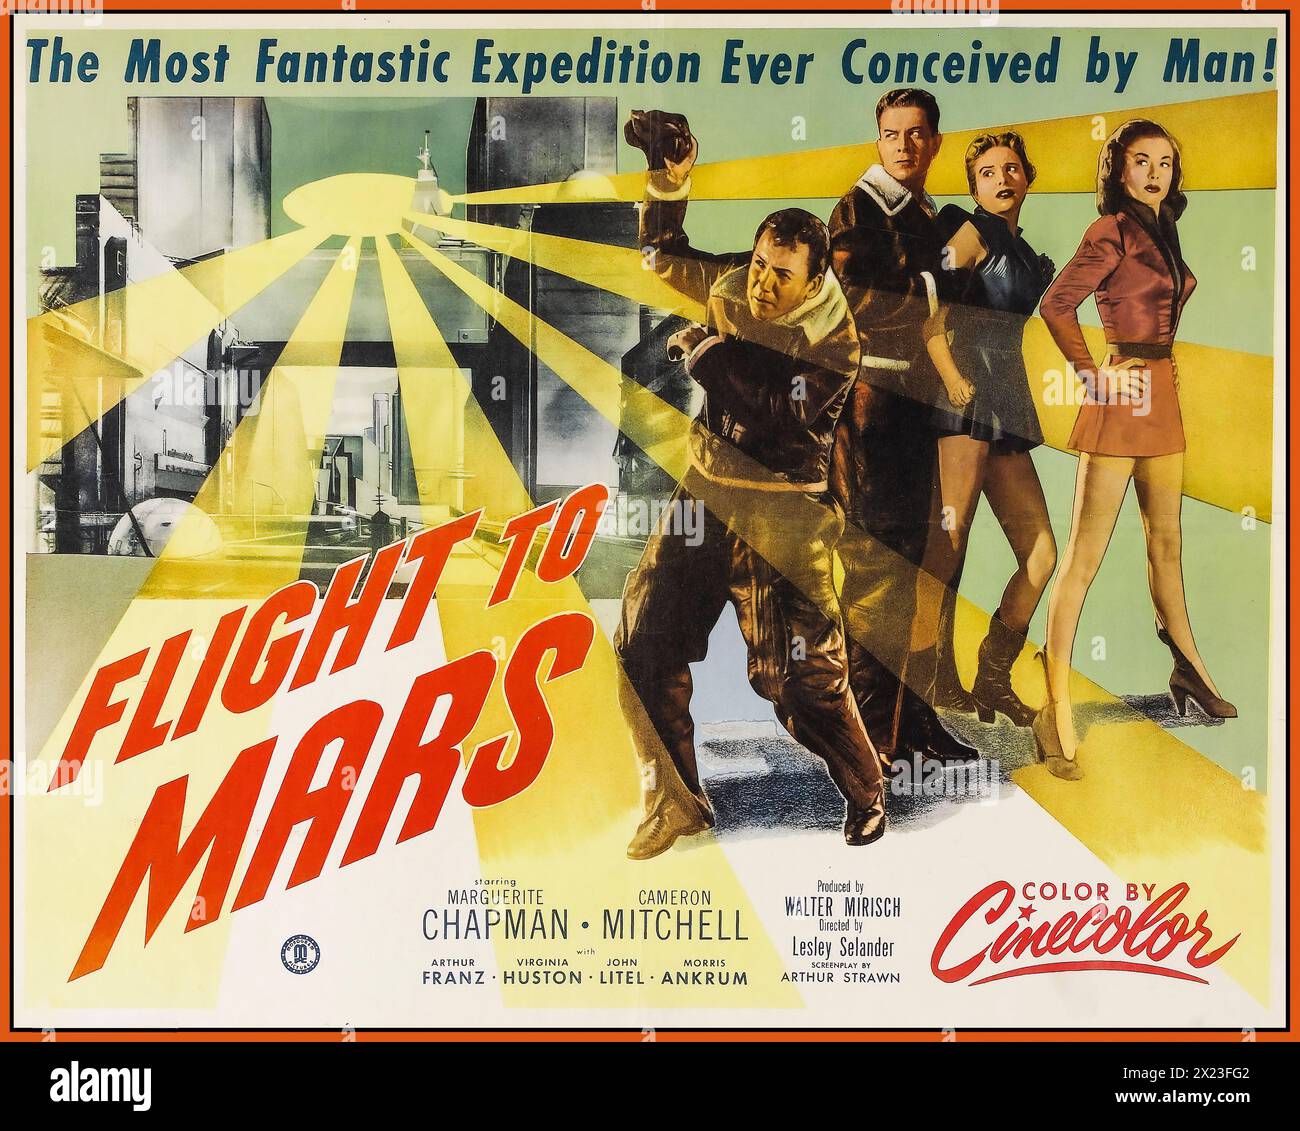 'Flight to Mars' film by Monogram Pictures 1951 vintage film movie poster. Starring Marguerite Chapman, Cameron Mitchell. Directed by Lesley Selander. Produced by Walter Mirisch.Flight to Mars is a 1951 American Cinecolor science fiction film drama, produced by Walter Mirisch for Monogram Pictures, directed by Lesley Selander, that stars Marguerite Chapman, Cameron Mitchell, and Arthur Franz. The film's storyline involves the arrival on the Red Planet of an American scientific expedition team, who discover that Mars is inhabited by an underground-dwelling. Stock Photo